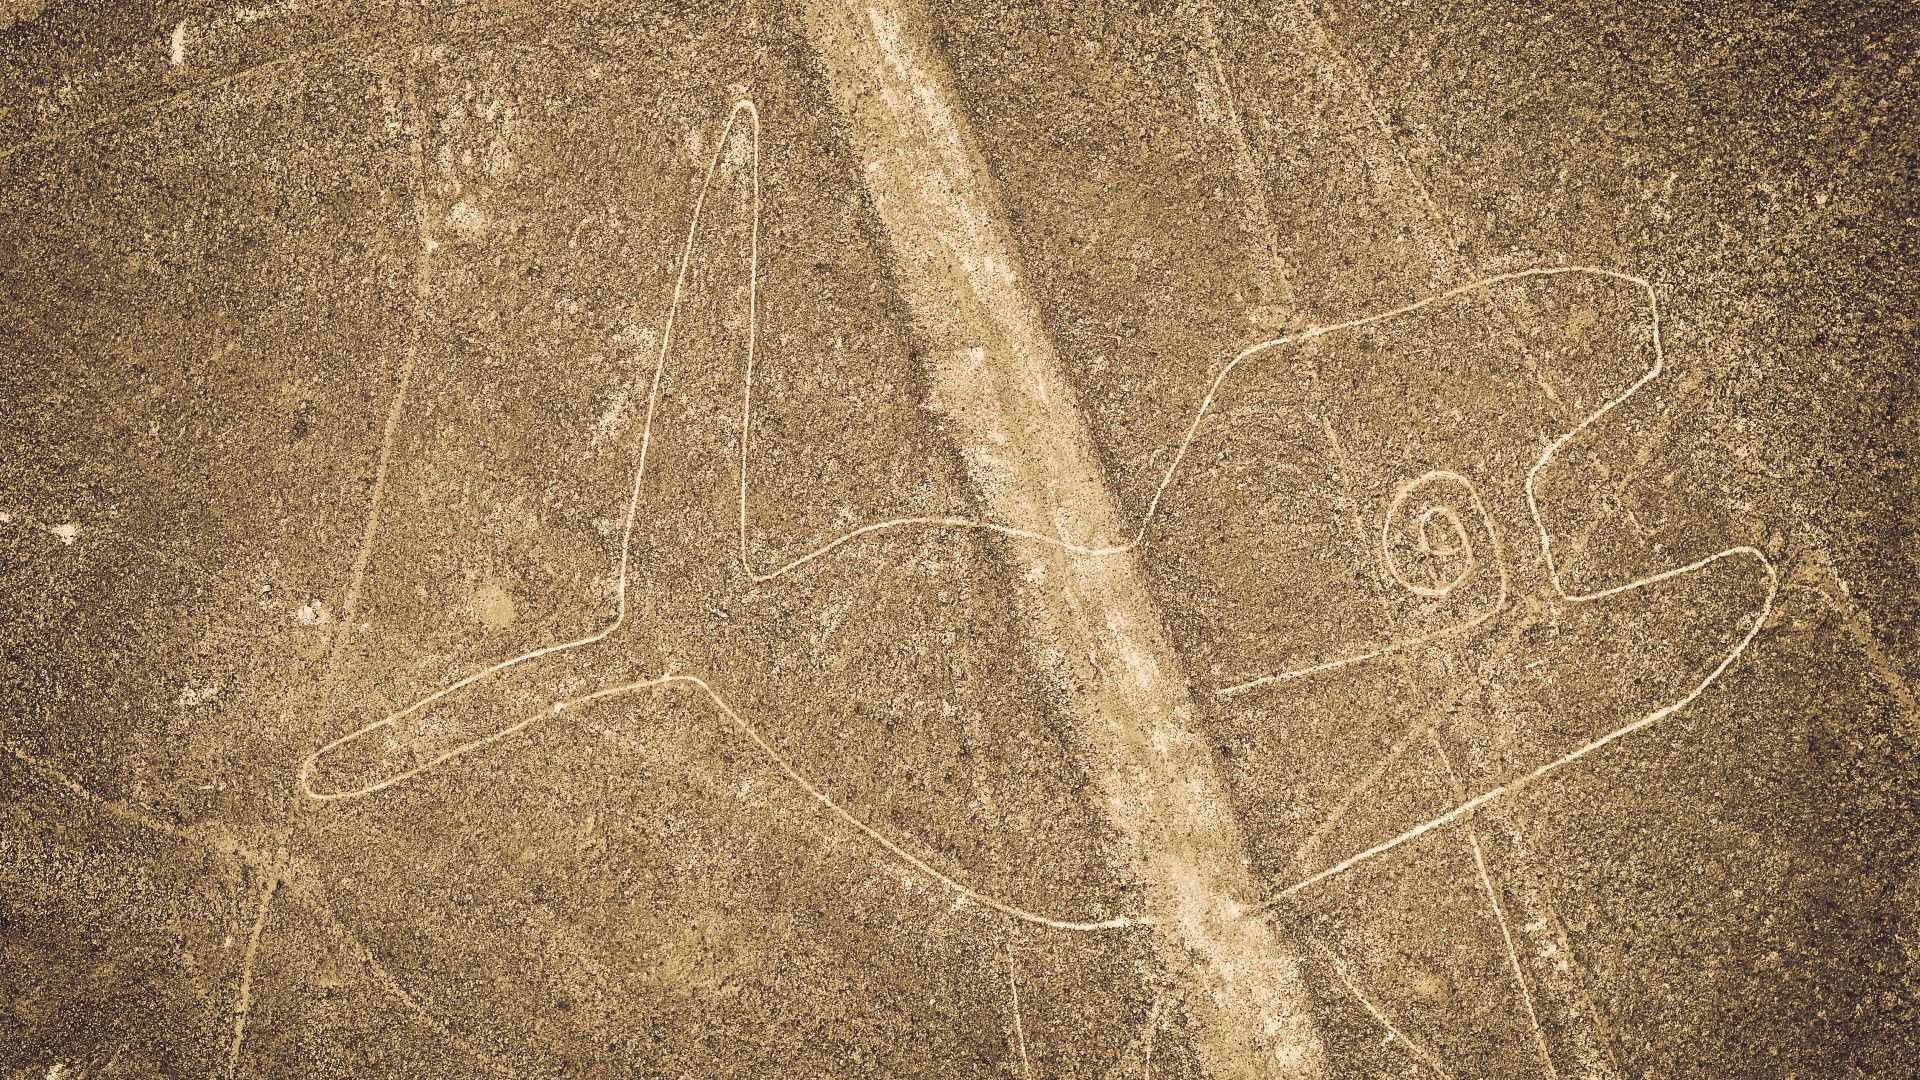 <p>                     The well-defined flippers and fluke (tail) make it obvious that this drawing shows a whale. The Nazca were particularly enamored with these majestic creatures, often carving their likeness into pottery, according to the American Museum of Natural History.                    </p>